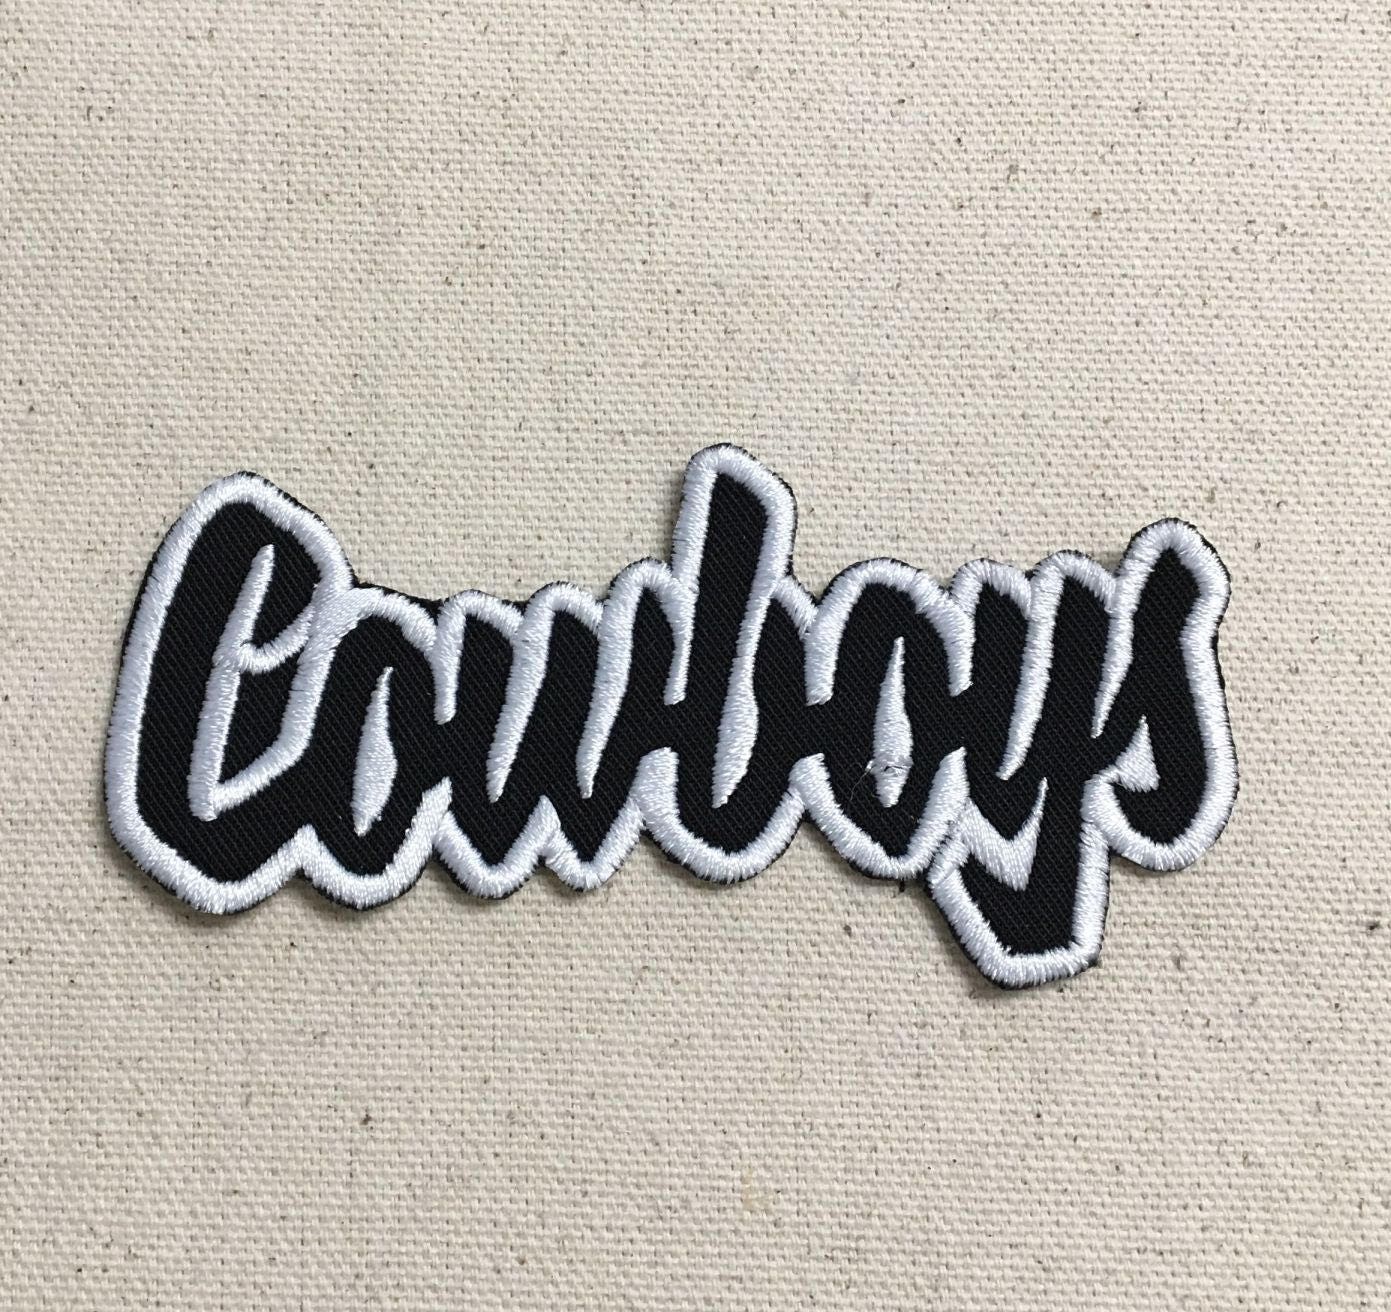  Lets Get Rowdy Patch Dallas Football Team Parody Box Logo Embroidered  Iron On : Clothing, Shoes & Jewelry